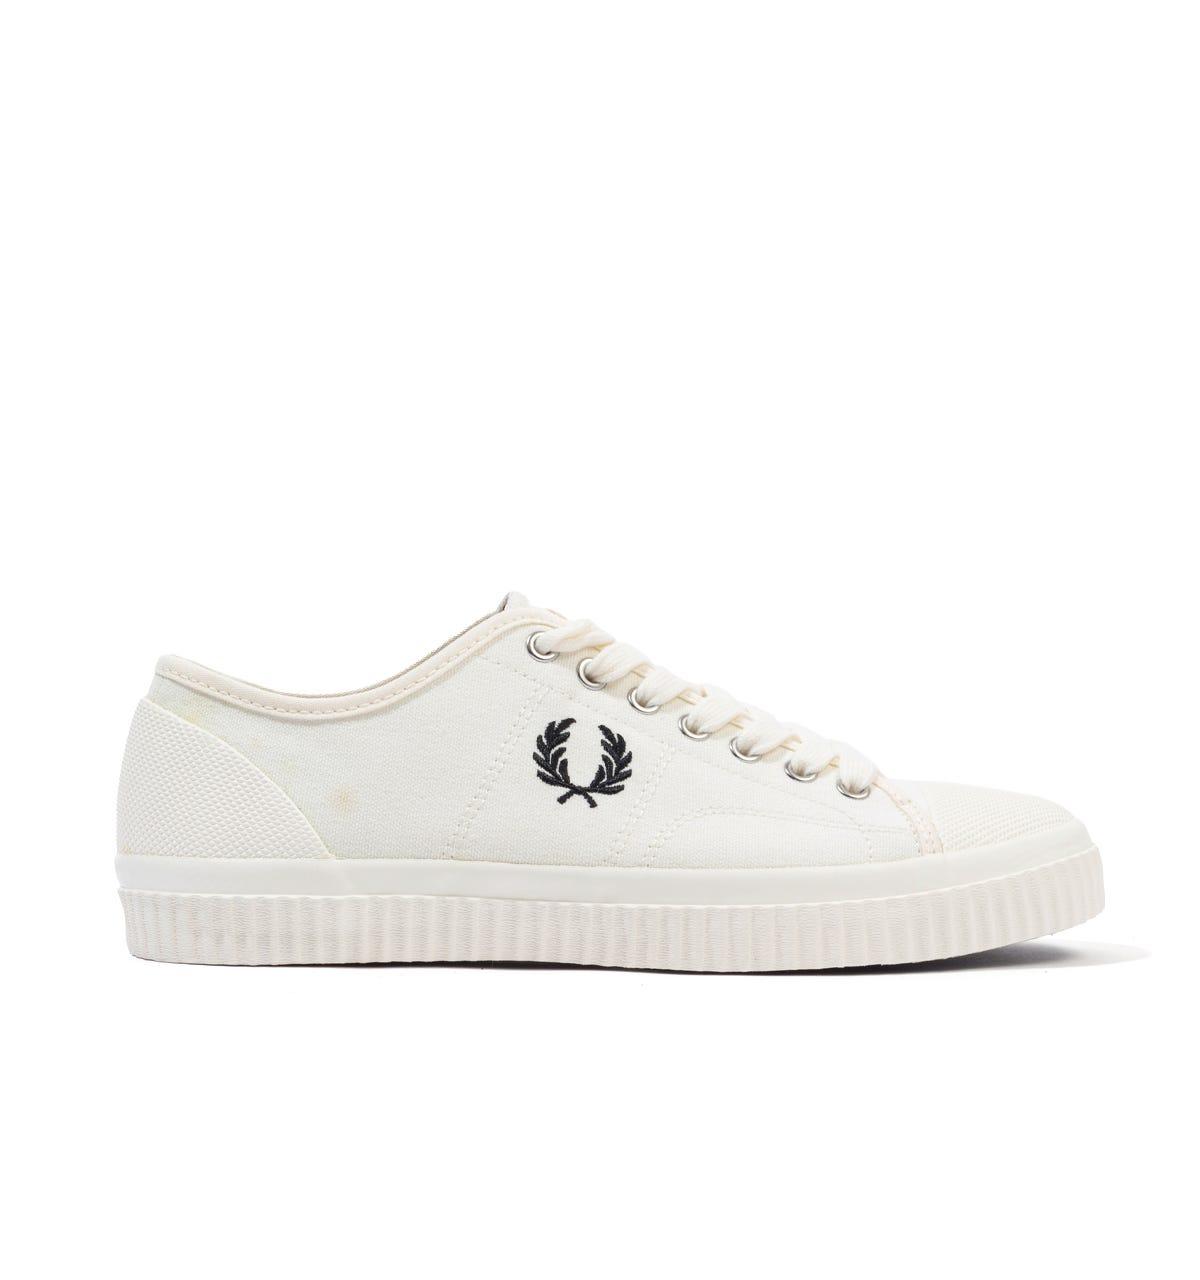 Fred Perry Hughes Low Canvas Trainers in Beige (Natural) for Men - Save 35%  | Lyst